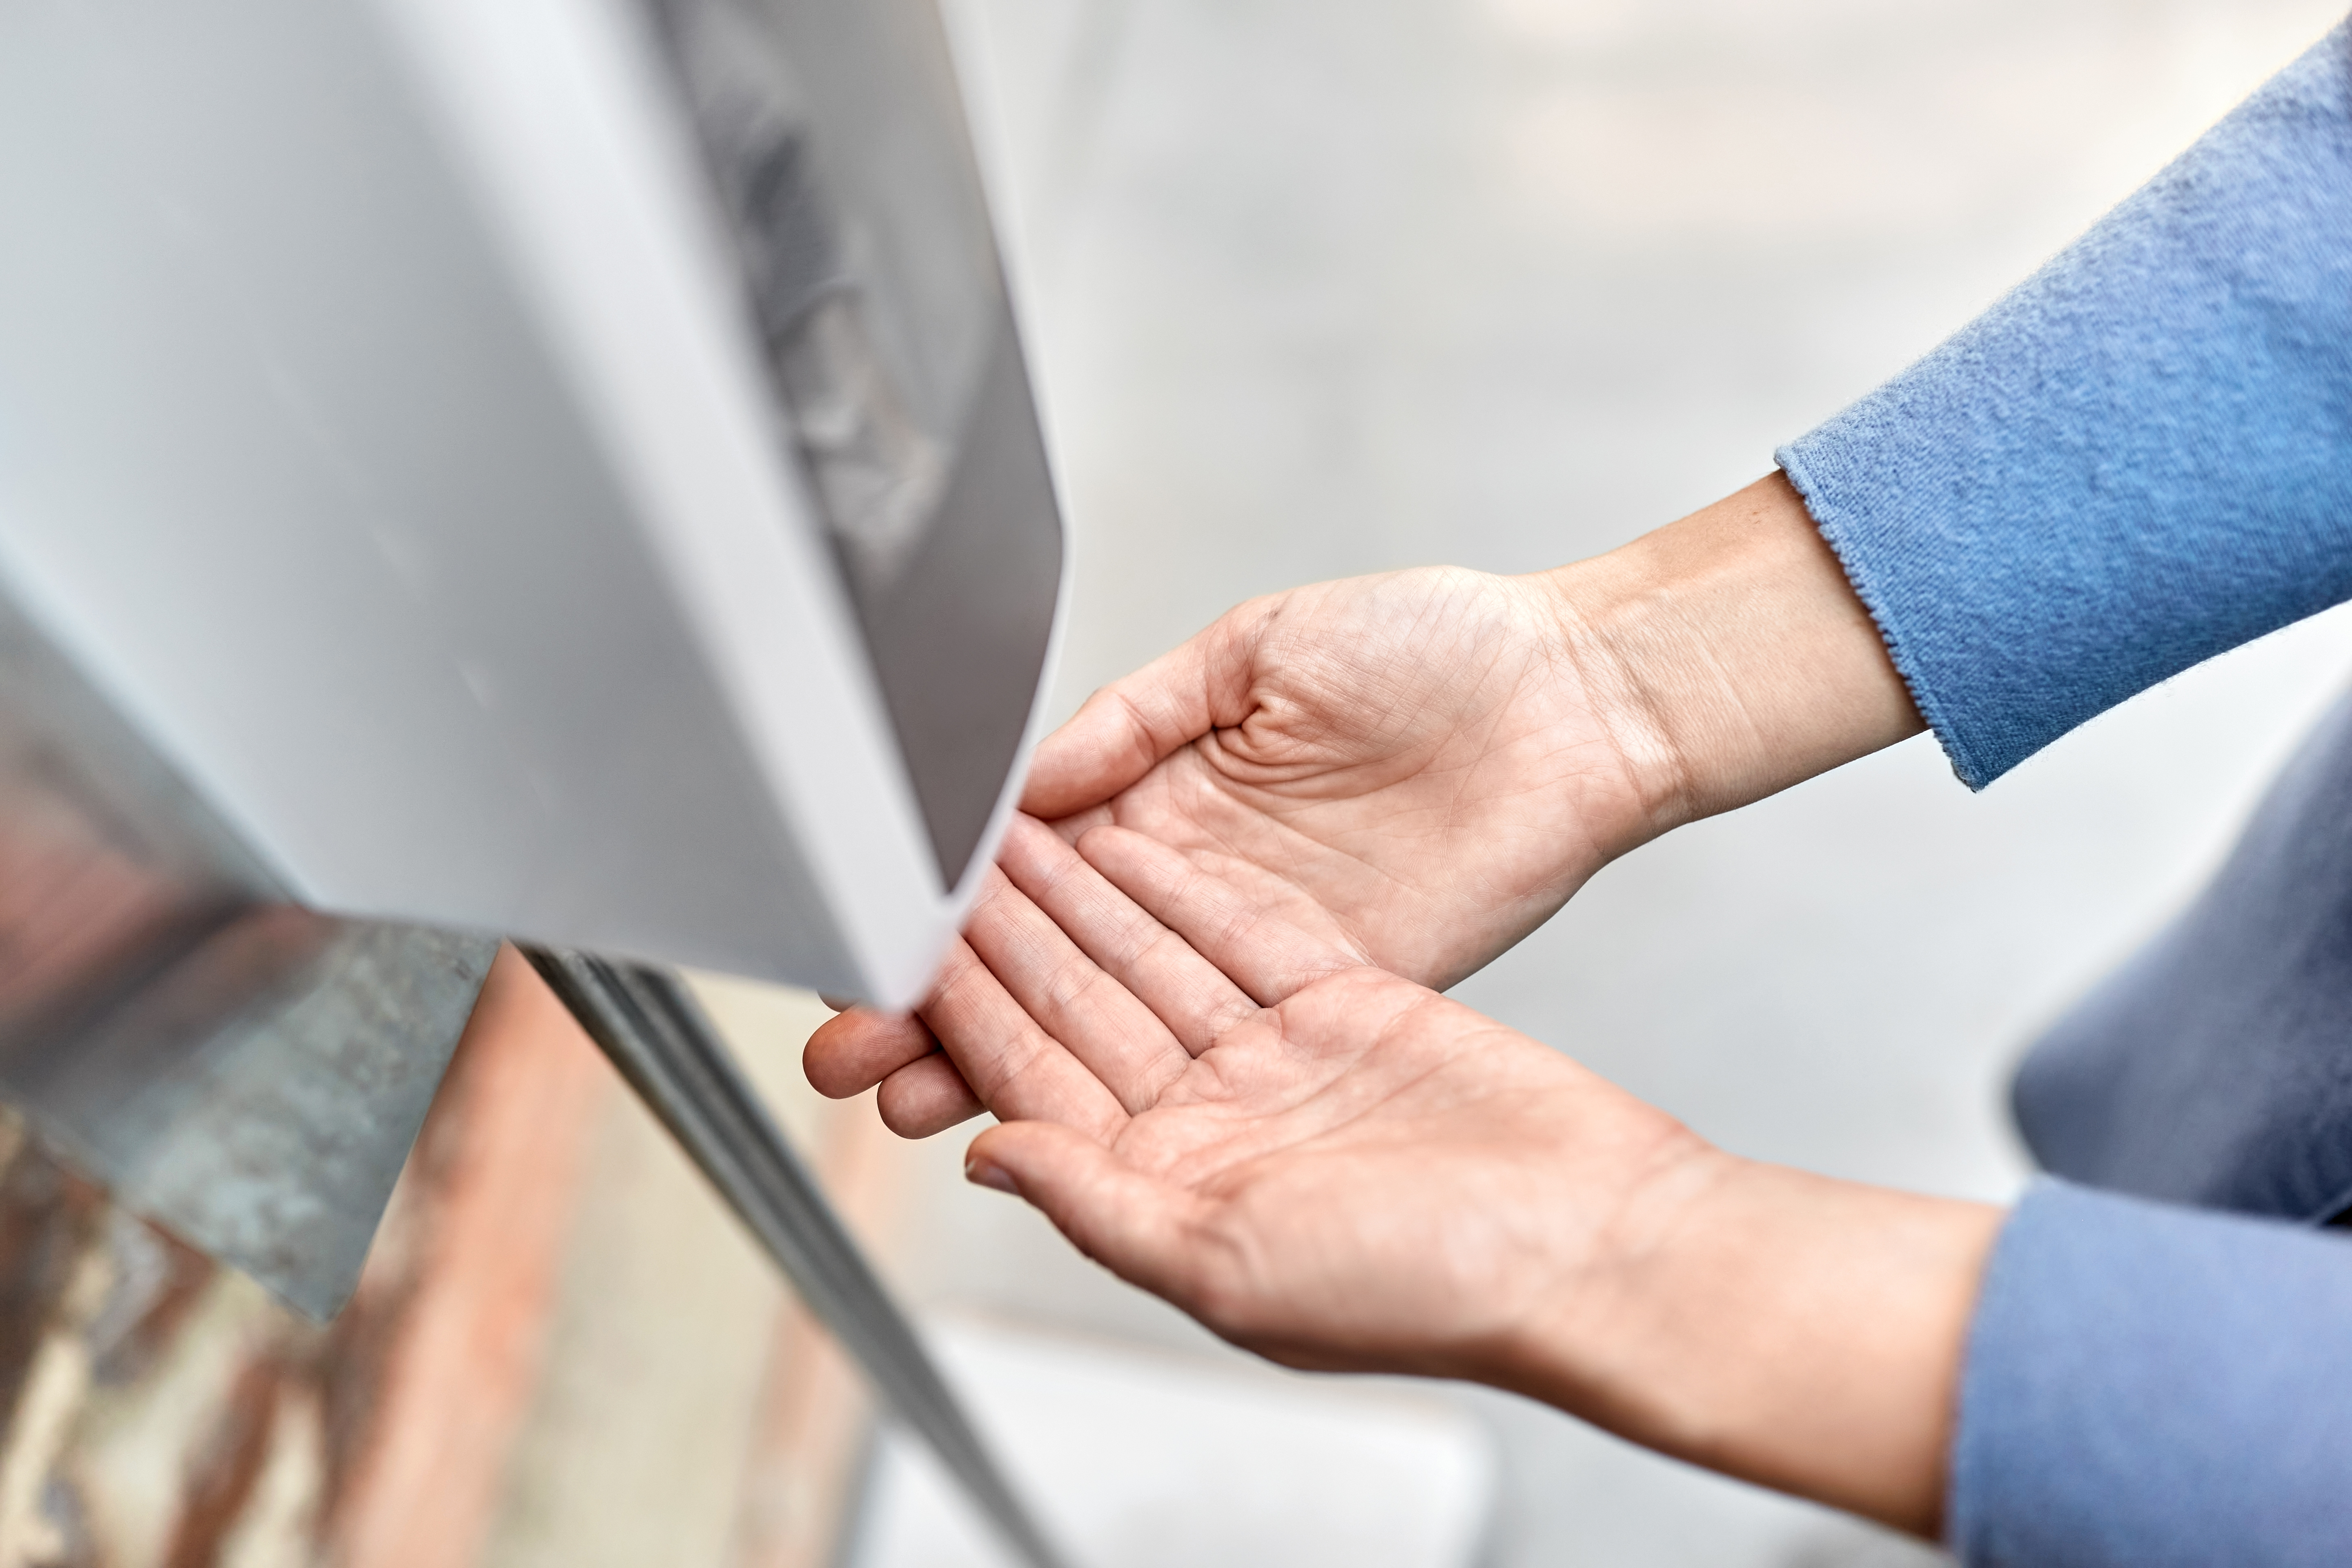 3 Outdated Beliefs About Electronic Hand Hygiene Monitoring